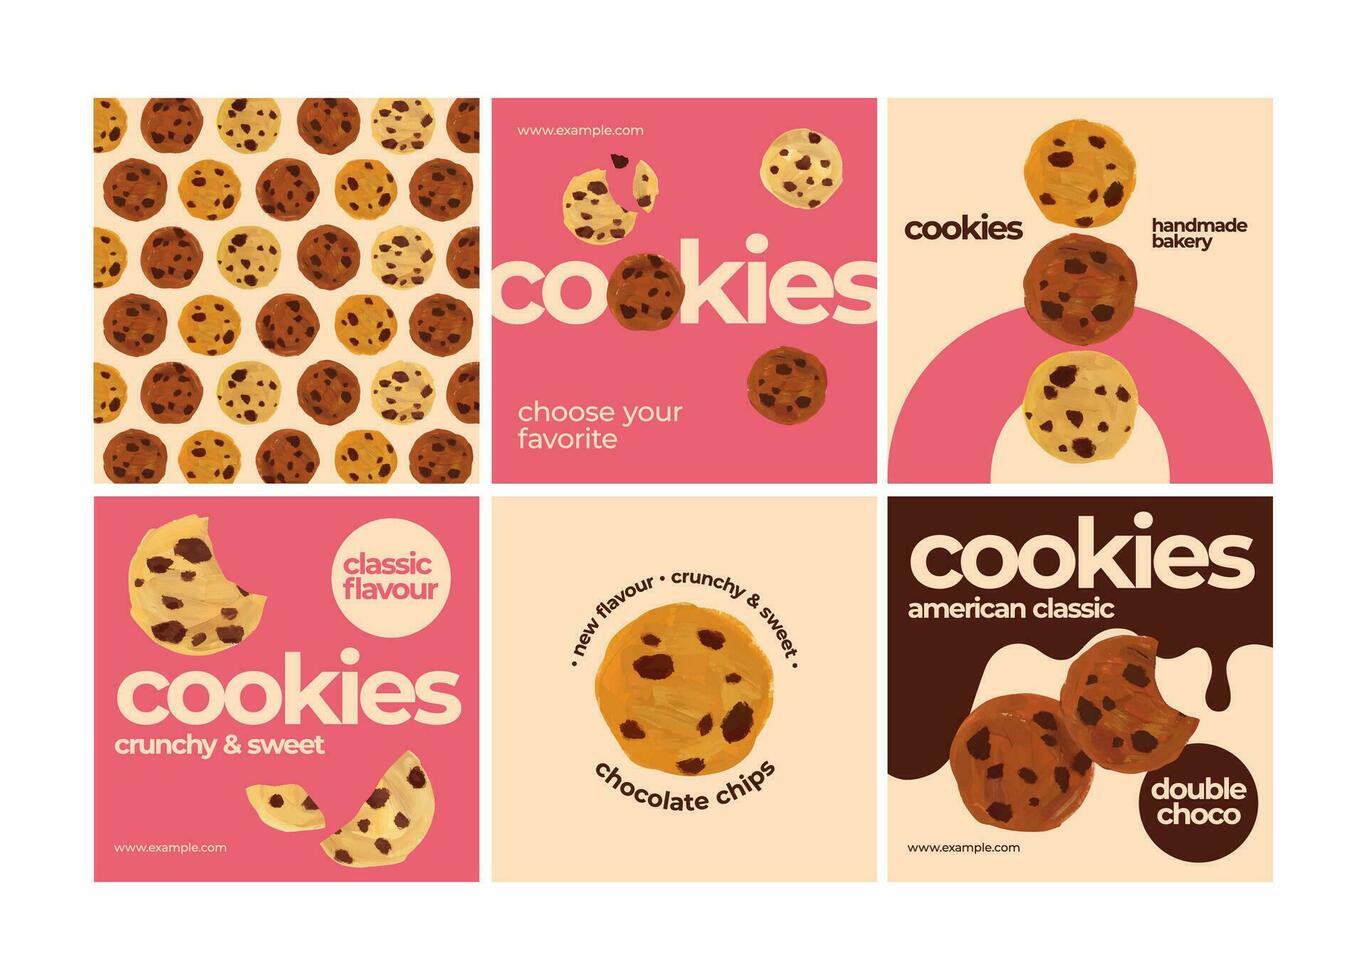 Bakery shop social media templates for posts, ads banners set. Promo posters design for cookies brand or bake shop production, isolated layouts with choco chip cookies painting vector illustration